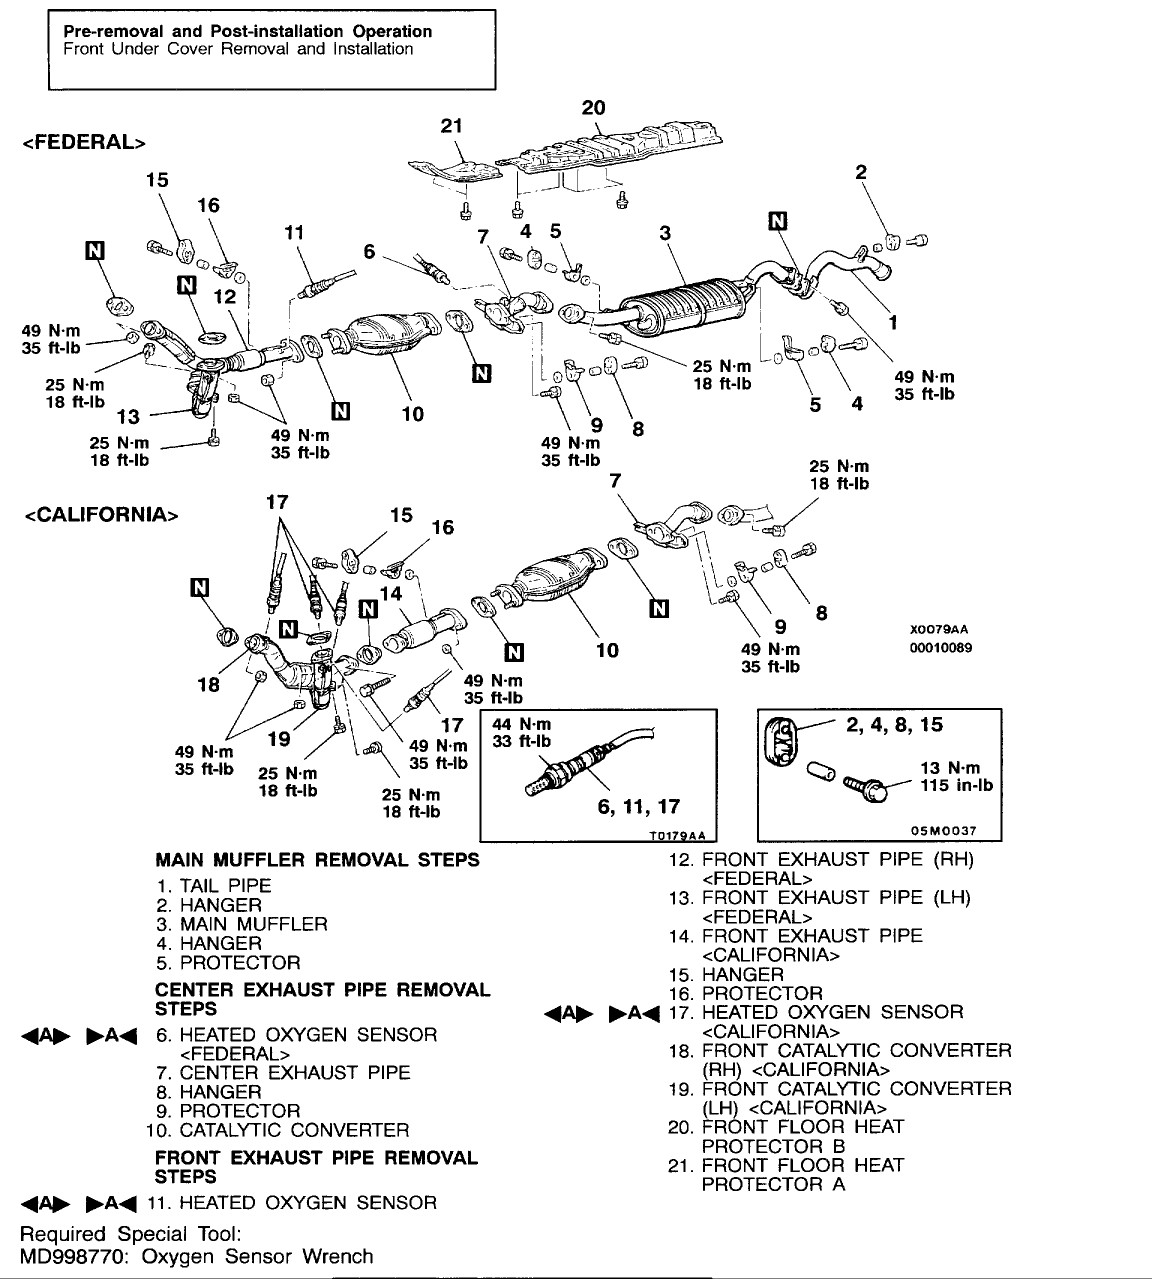 2000 Montero Sport Engine Diagram when You Replace One Cat In Our 2000 Montero Sport N T the Other Replaced Also Ey Of 2000 Montero Sport Engine Diagram